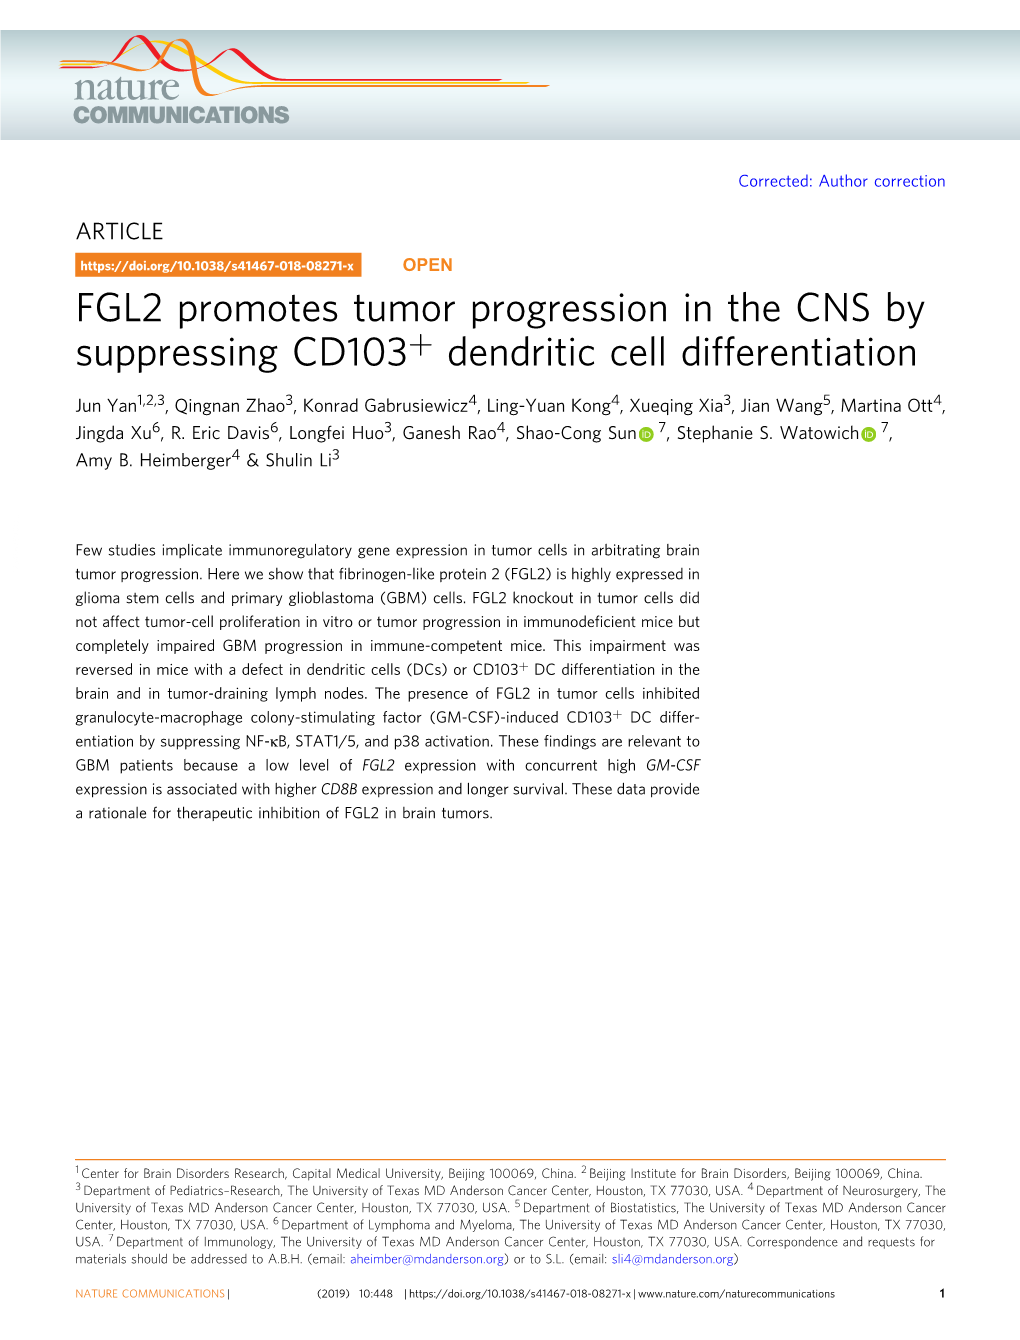 FGL2 Promotes Tumor Progression in the CNS by Suppressing CD103+ Dendritic Cell Differentiation